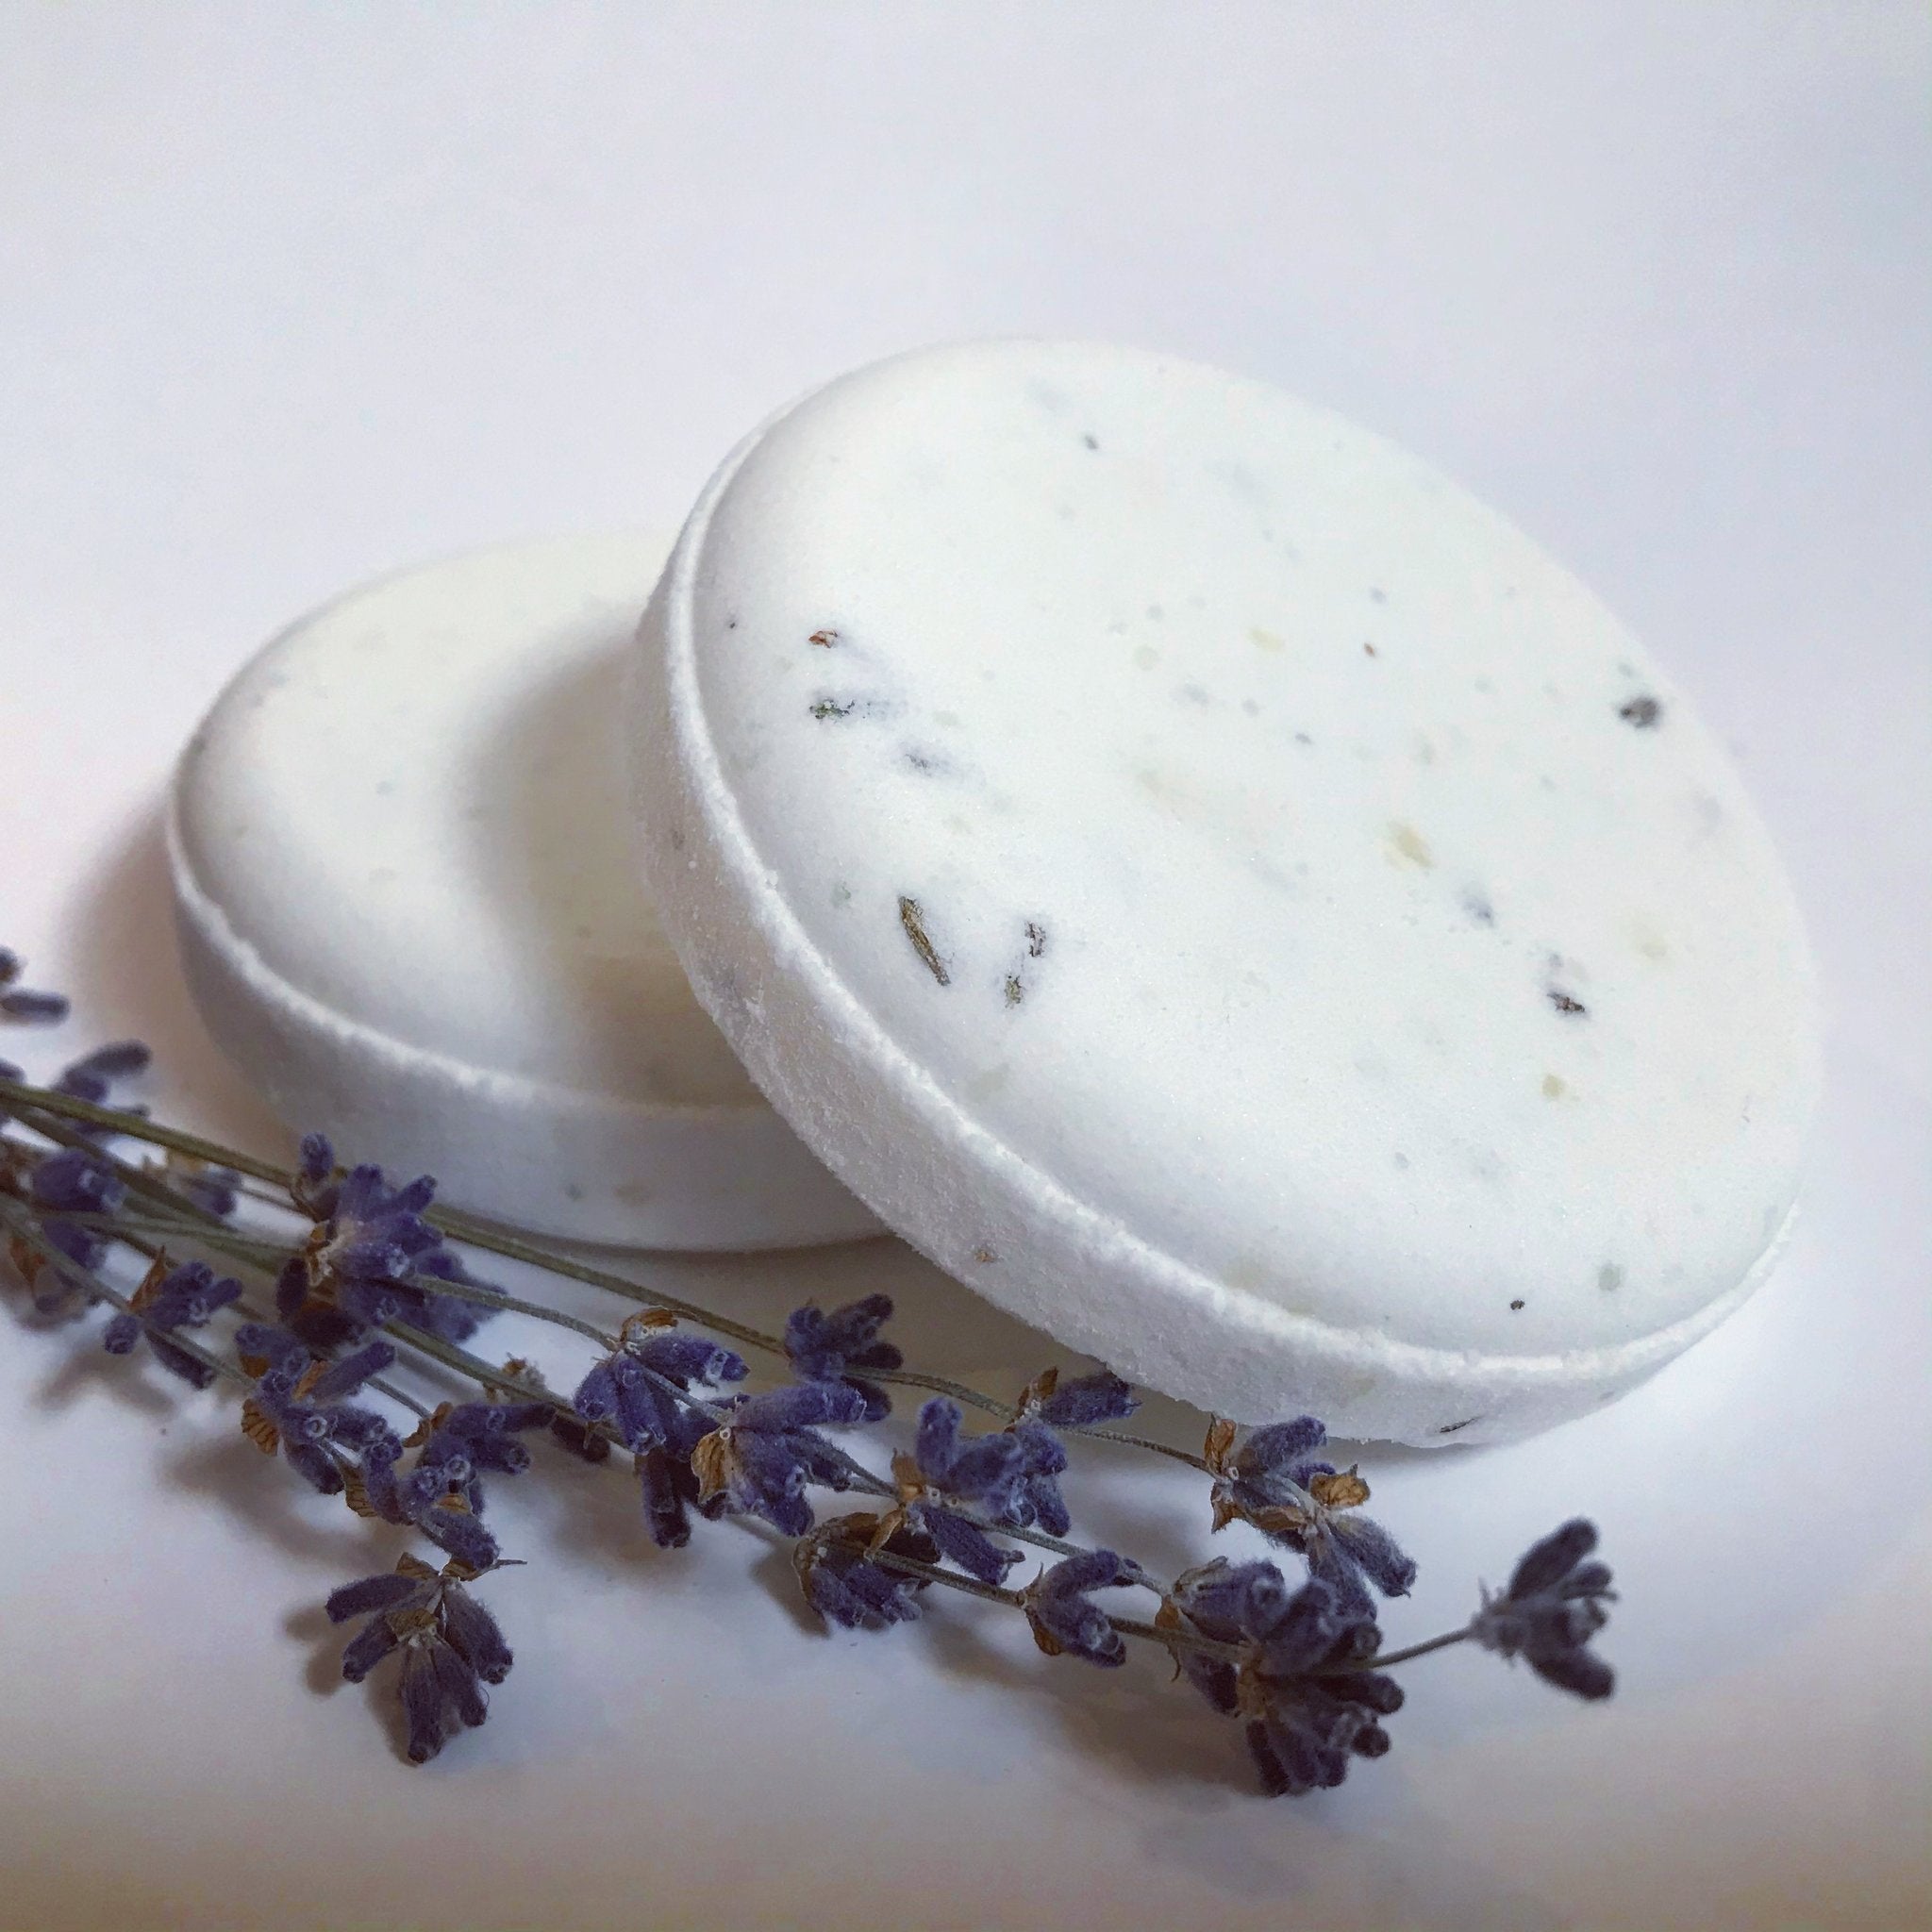 Asteria Bath Bomb 100g Bath Bomb - nelsonnaturals remineralizing toothpaste